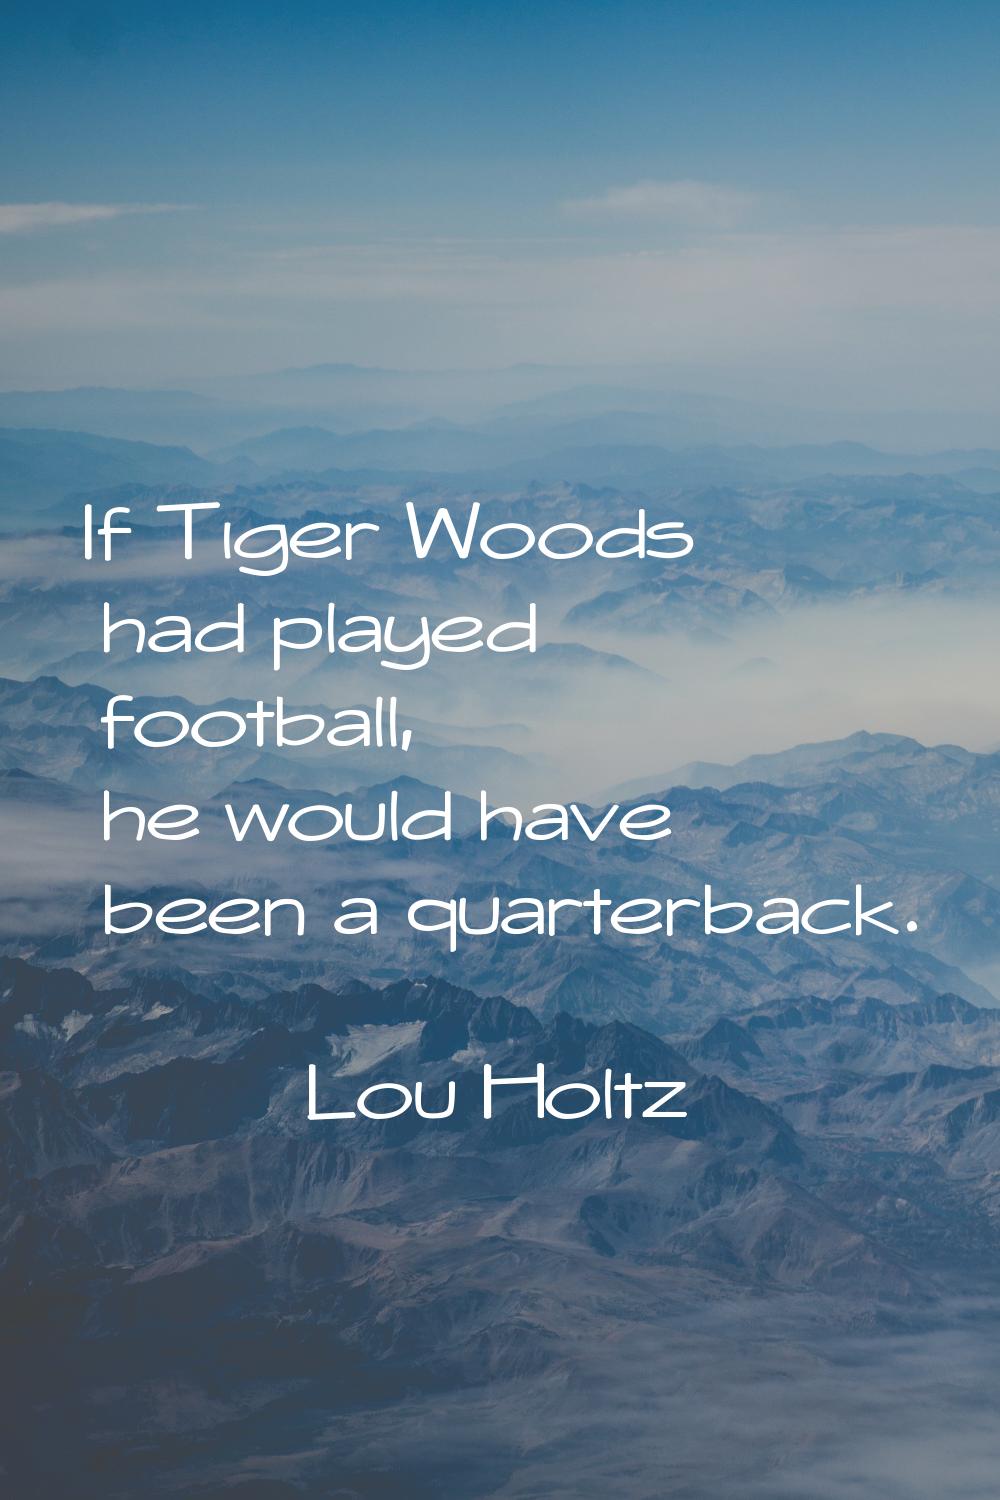 If Tiger Woods had played football, he would have been a quarterback.